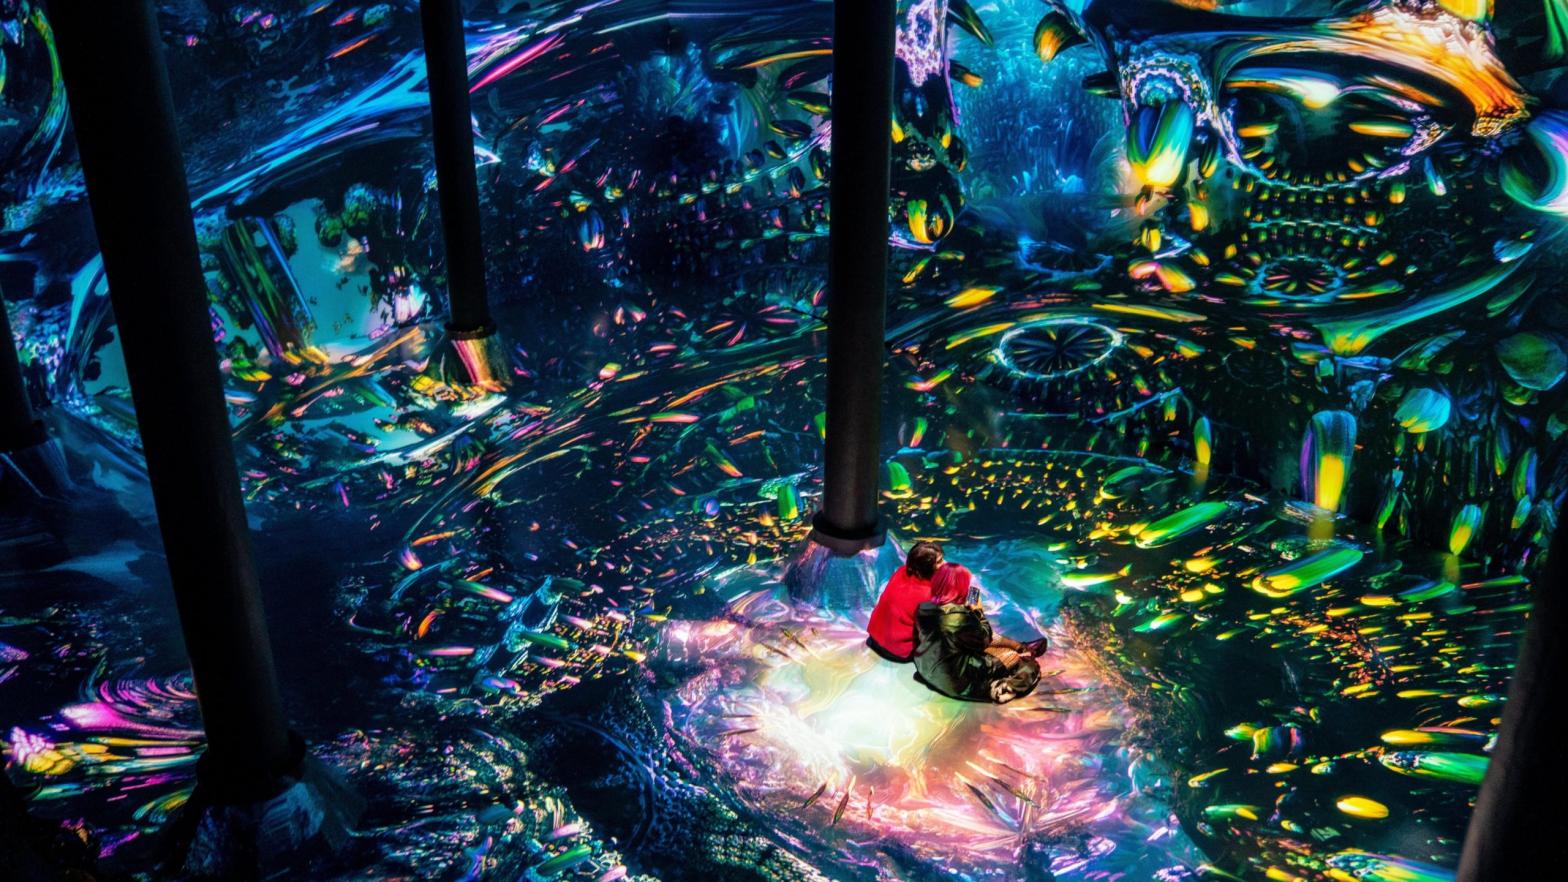 Two people sit in an immersive art installation by Julius Horsthuis on March 5, 2021 in New York City. (Photo: David Dee Delgado, Getty Images)